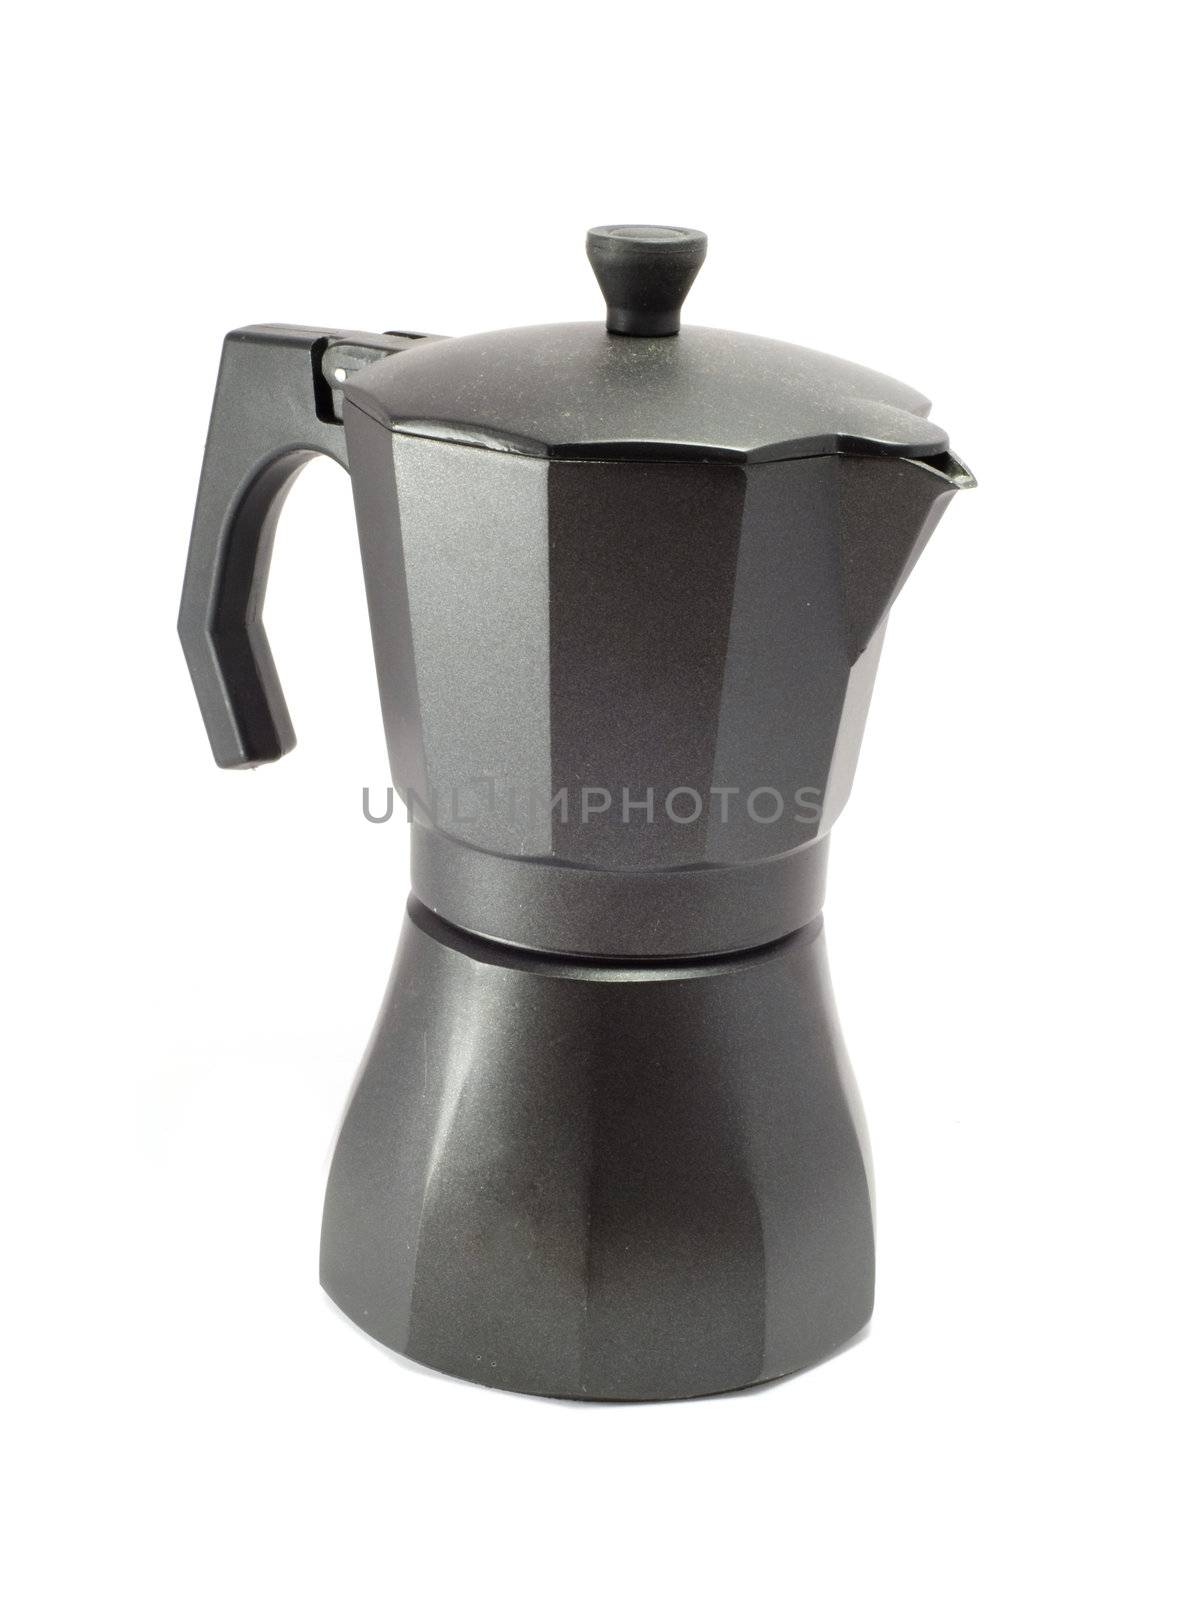 Black Italian coffee maker isolated on white background